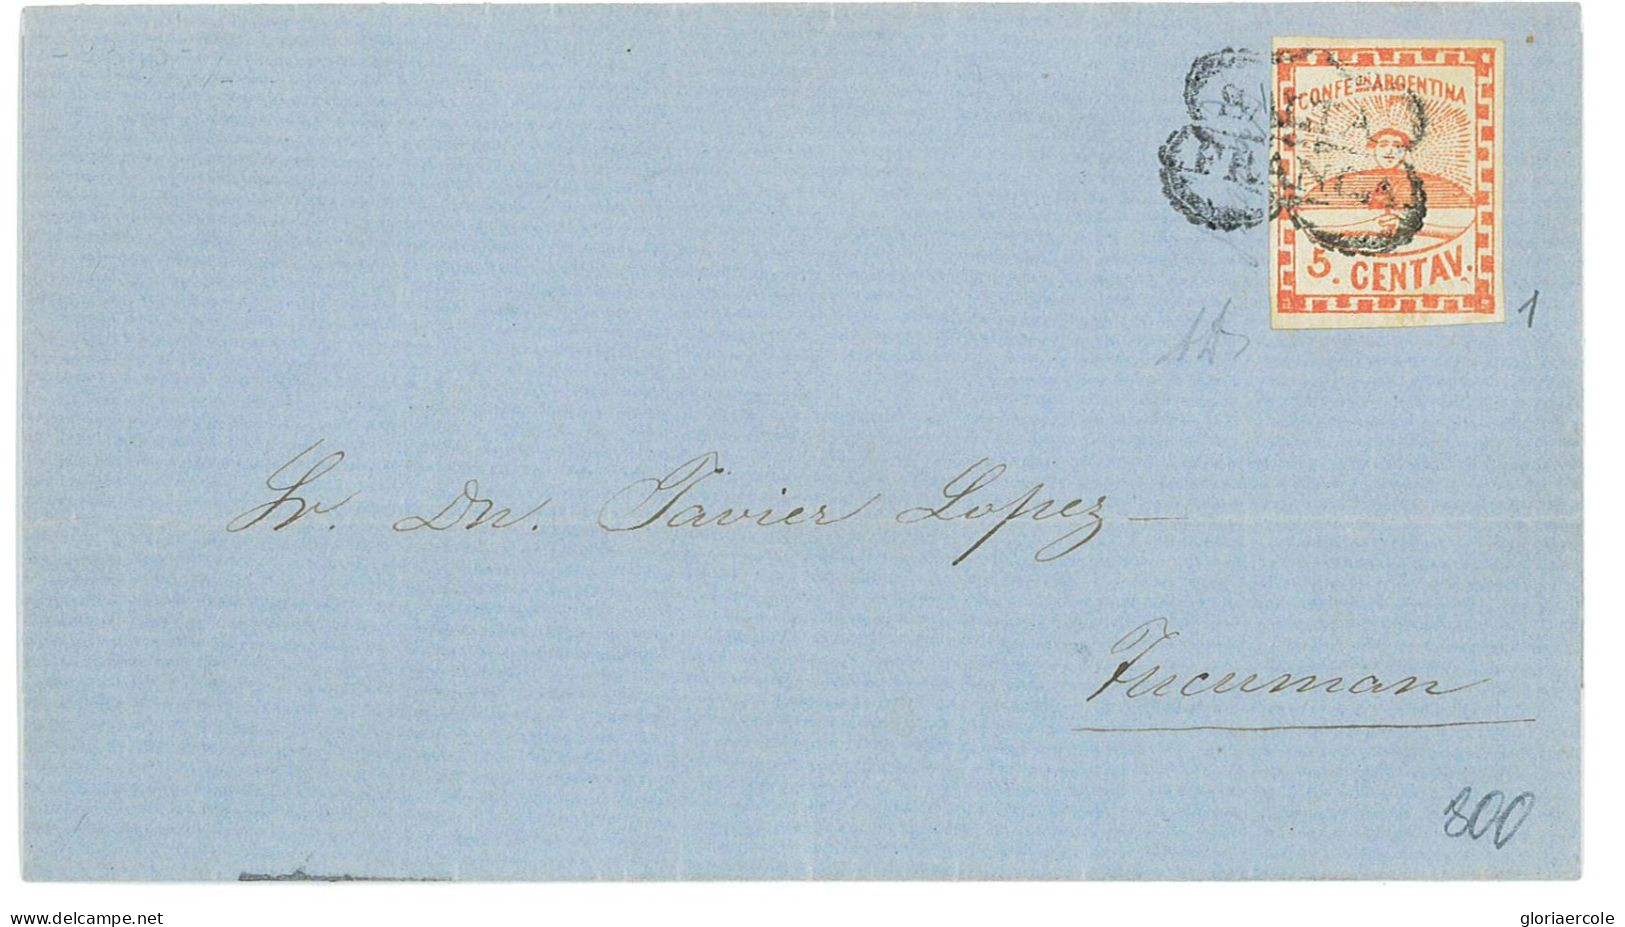 P2849 - CONFEDERACION ARGENTINA , G.J. NR. 1 D (2 POINTS AFTER V) ON FOLDED LETTER. FROM SALTA TO TUCUMÁN - Covers & Documents